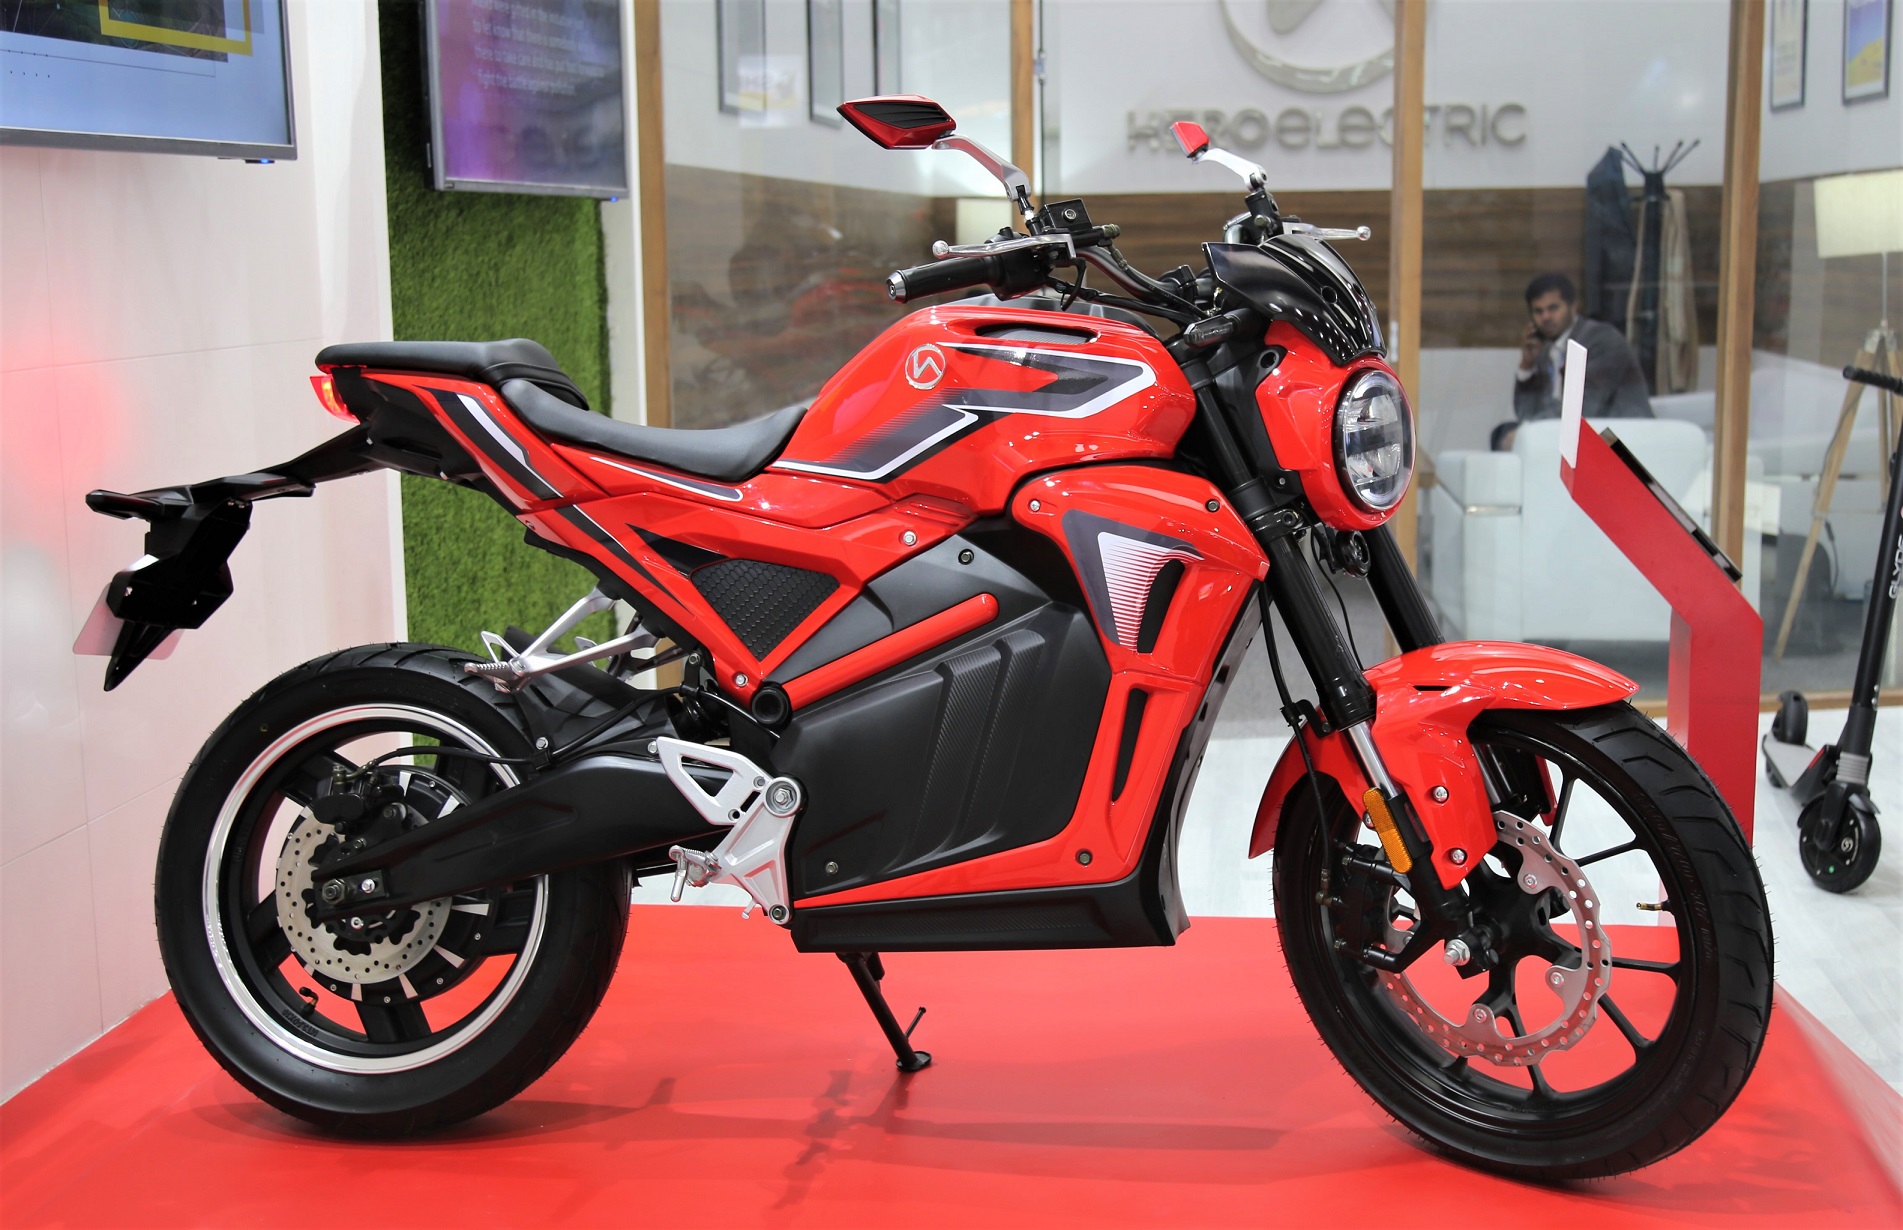 CF Moto Likely To Launch An Electric Bike Based On The 300 